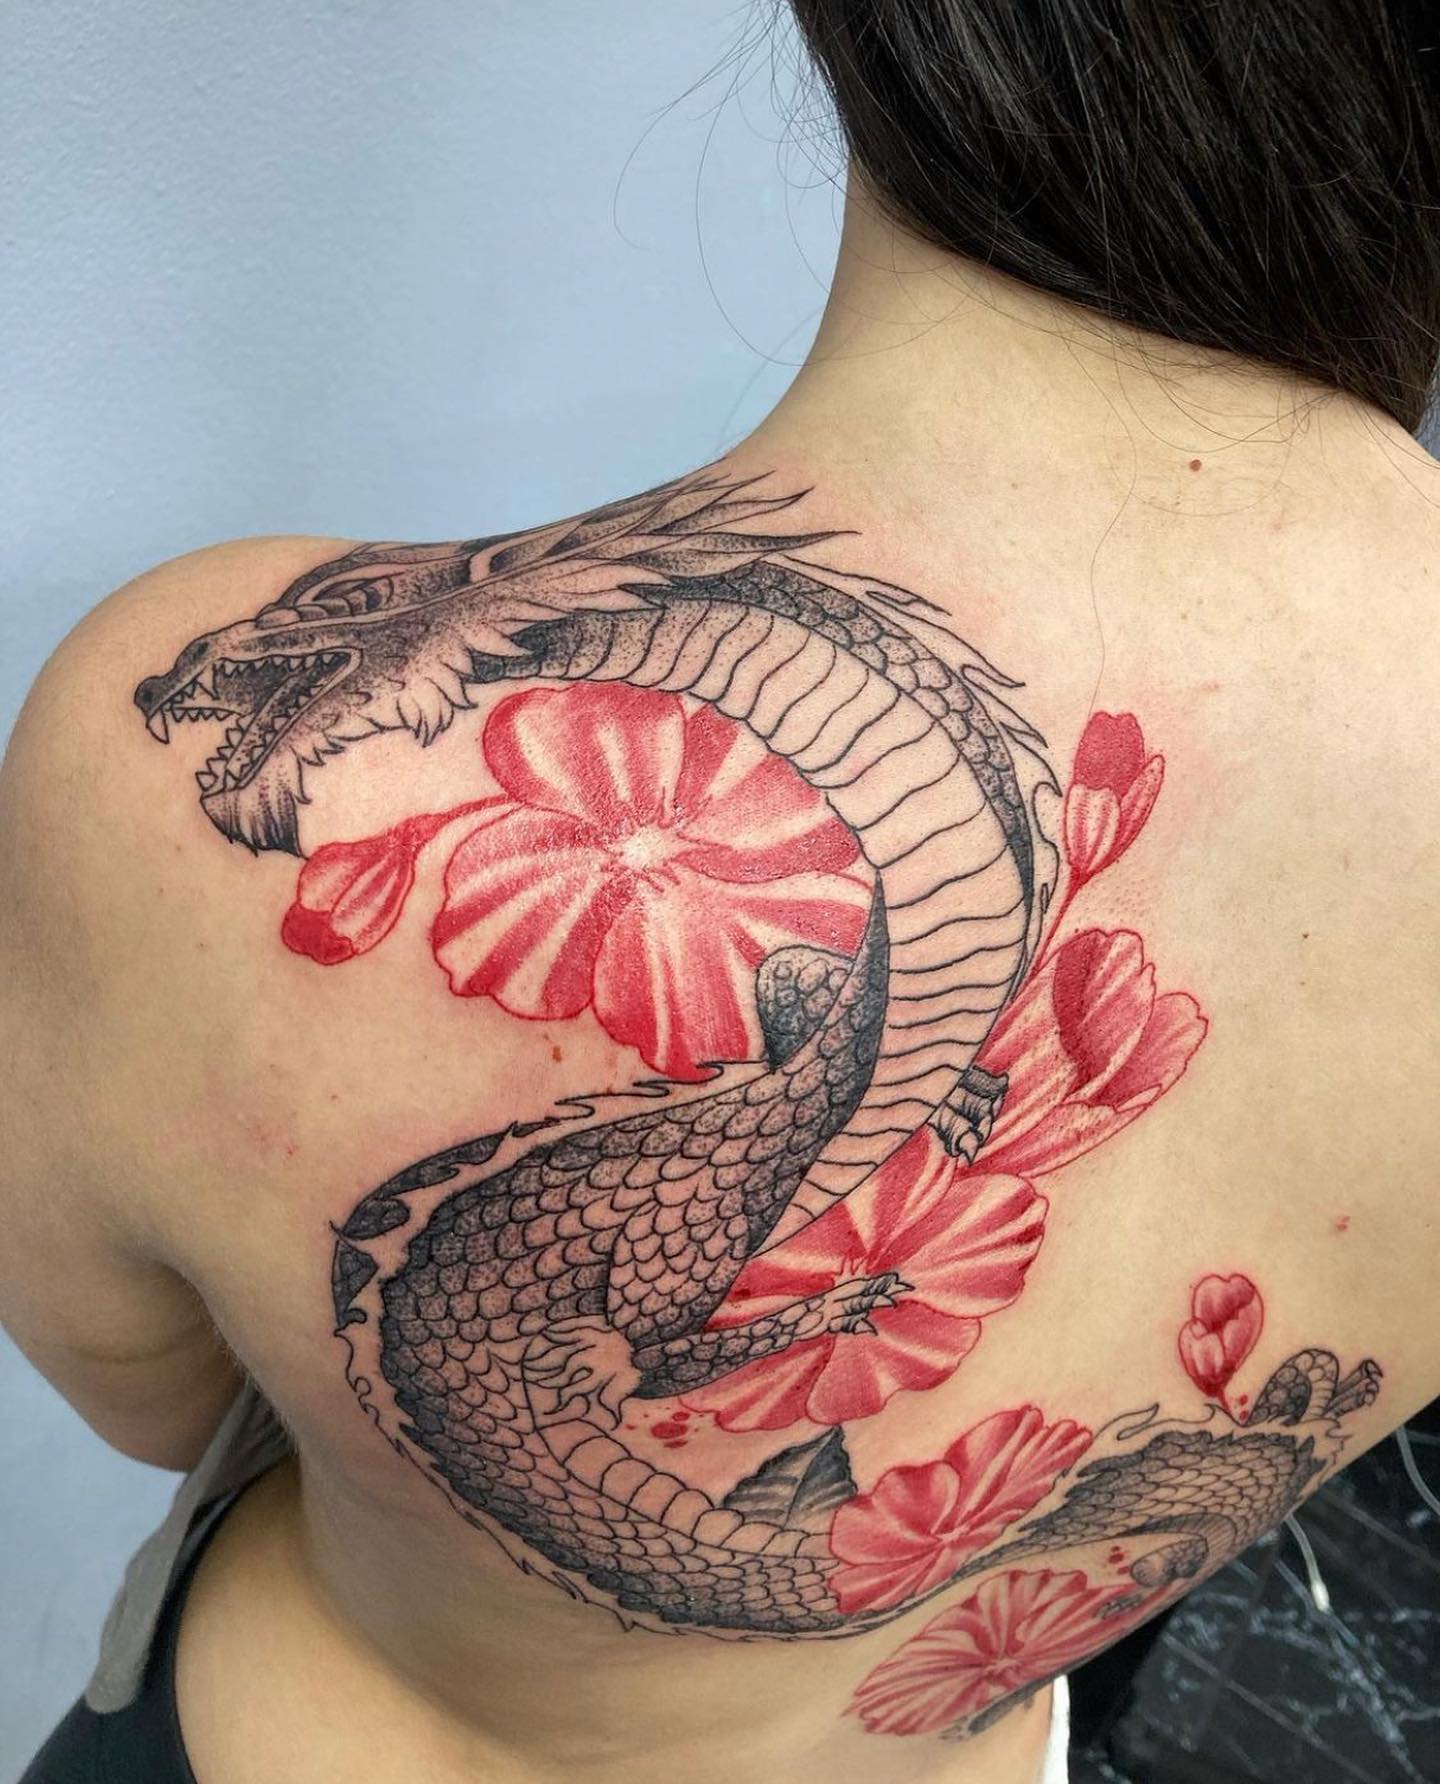 Show that you’re a bold young lady with this kimono dragon tattoo done in both black and red elements.